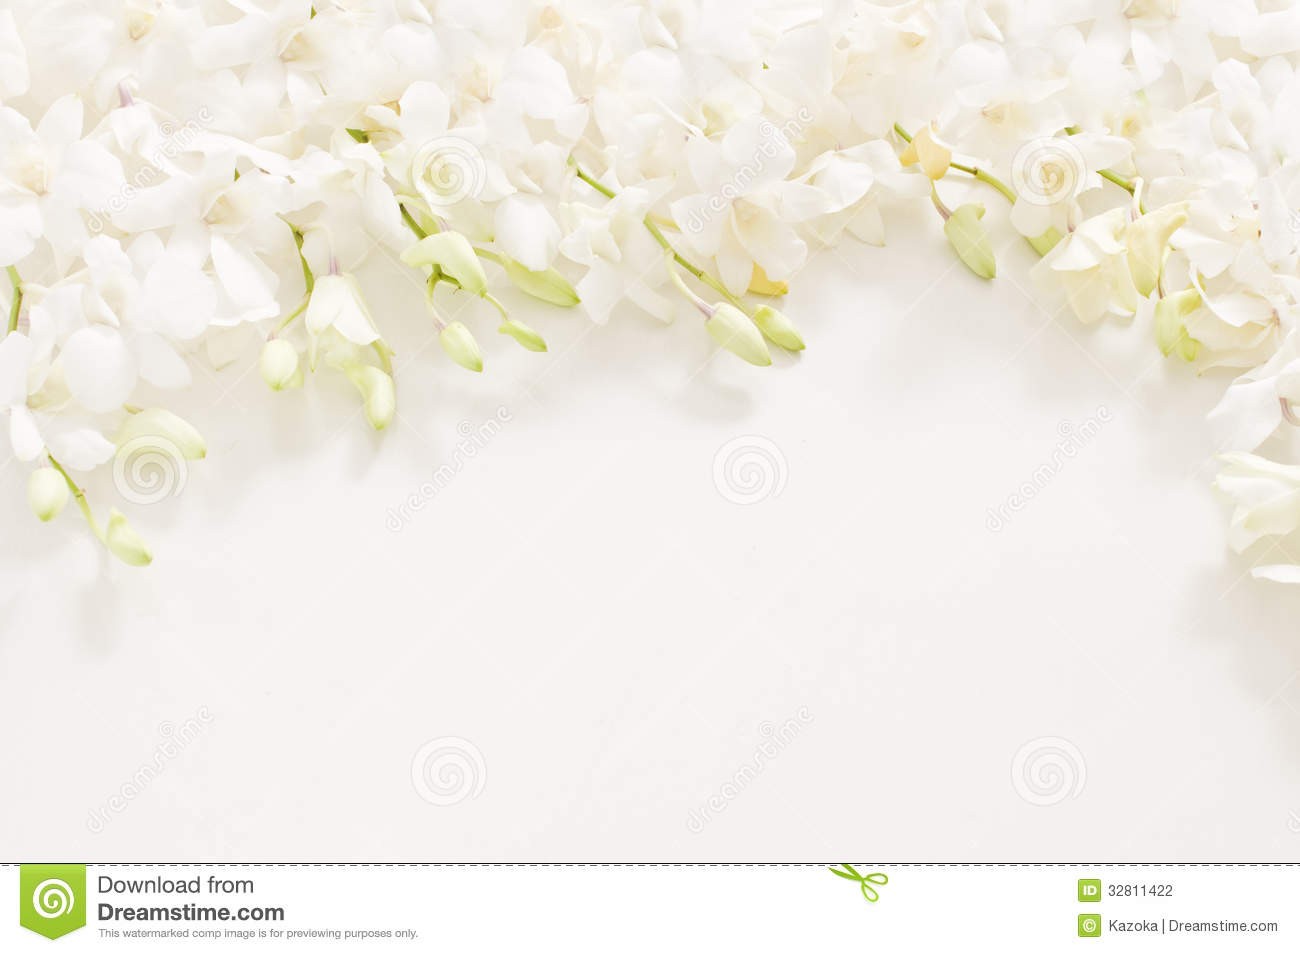 Image Of Funeral Stock Photo Rosary Japanese 32811422 Background Pictures For